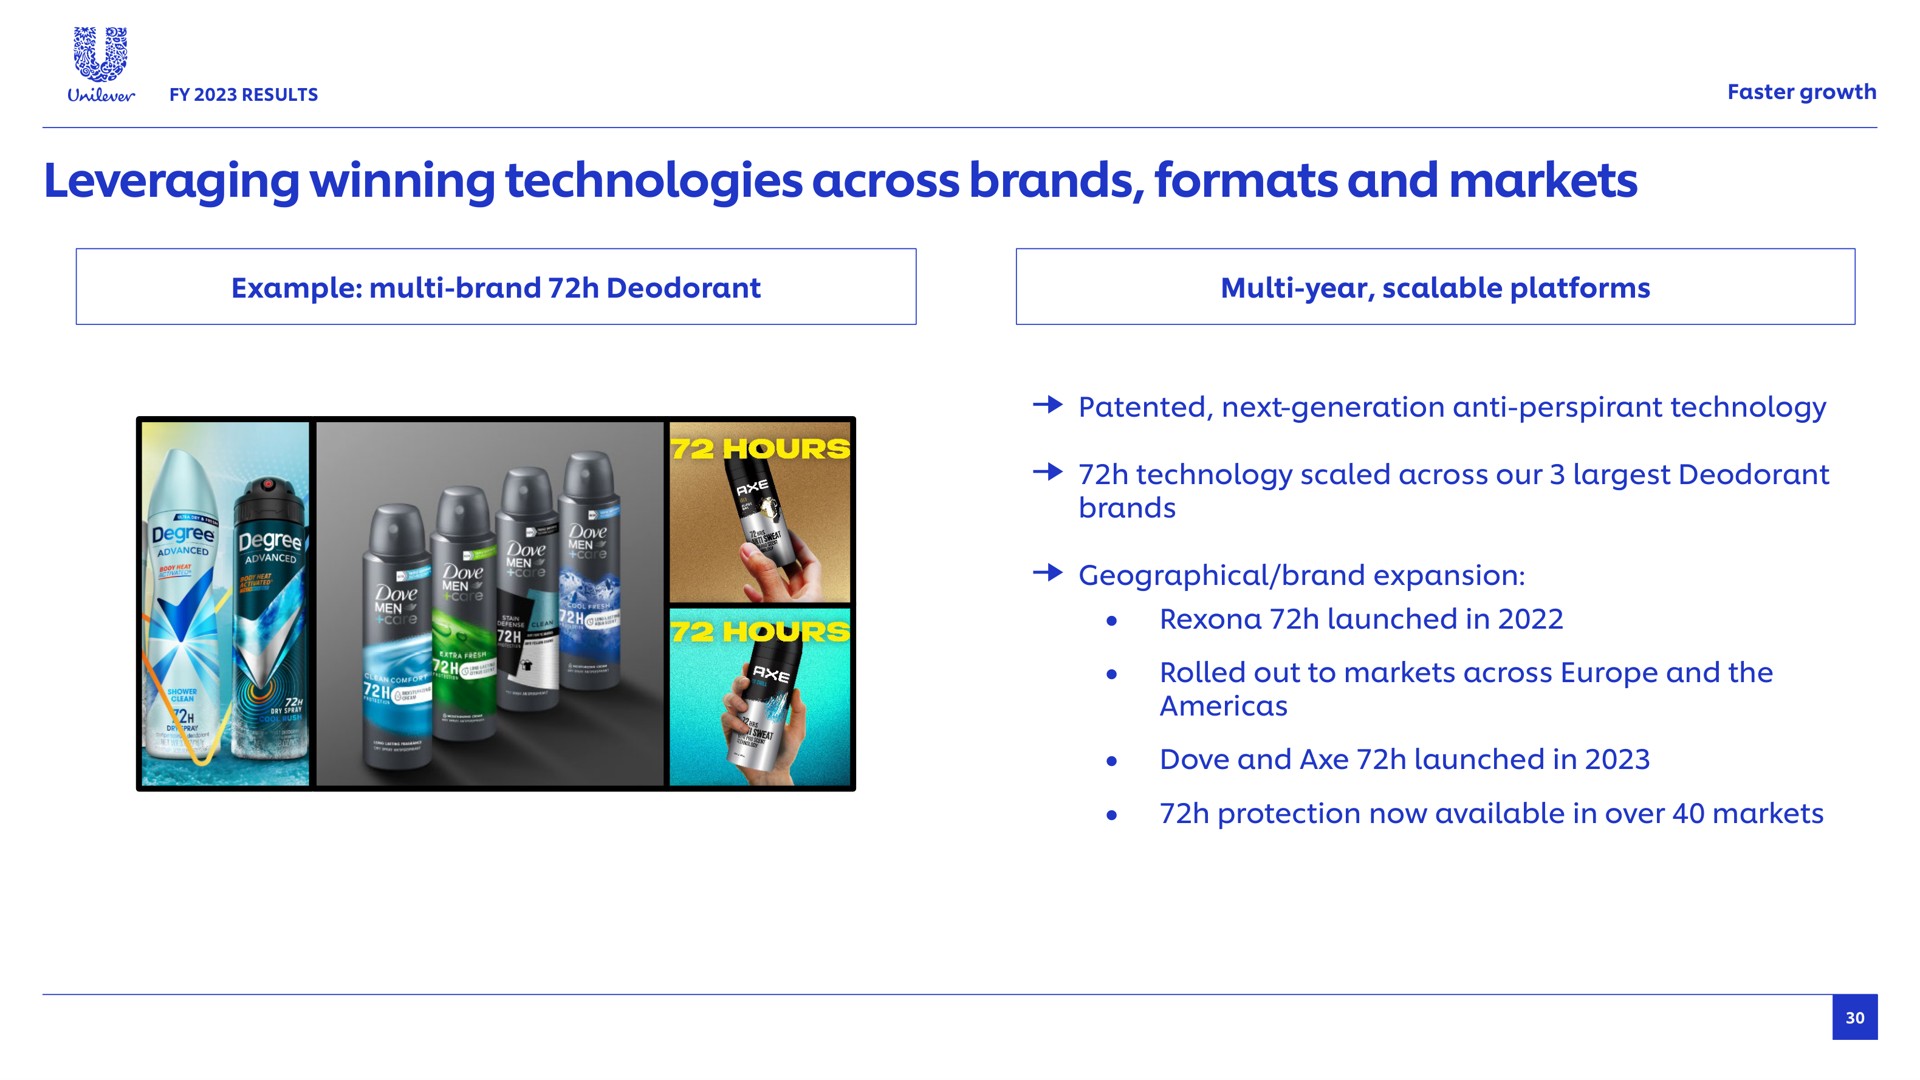 leveraging winning technologies across brands formats and markets bes faster growth example brand deodorant year scalable platforms patented next generation anti perspirant technology technology scaled our deodorant geographical brand expansion launched in rolled out to the dove axe launched in protection now available in over | Unilever